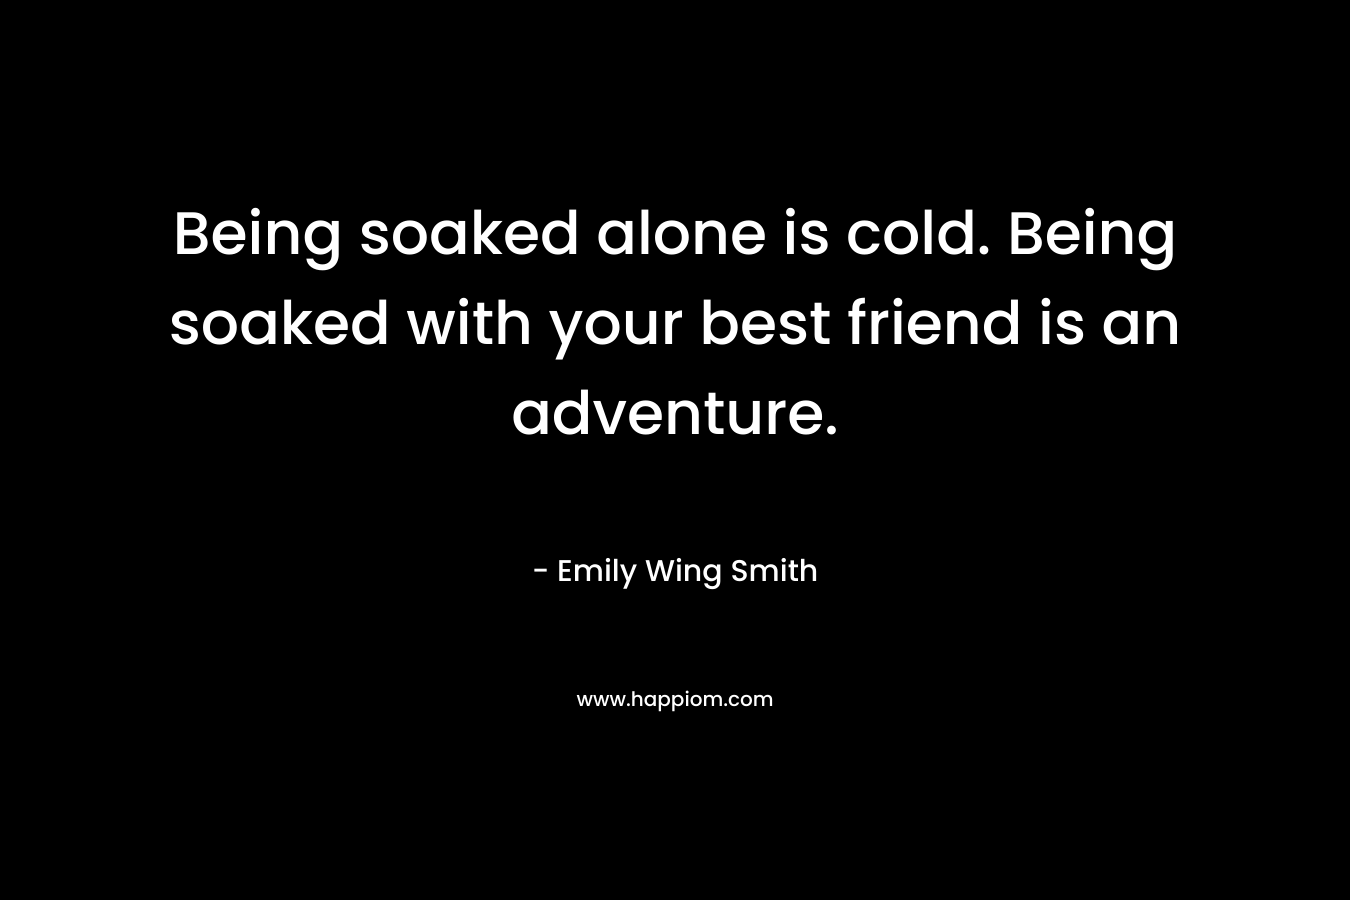 Being soaked alone is cold. Being soaked with your best friend is an adventure.